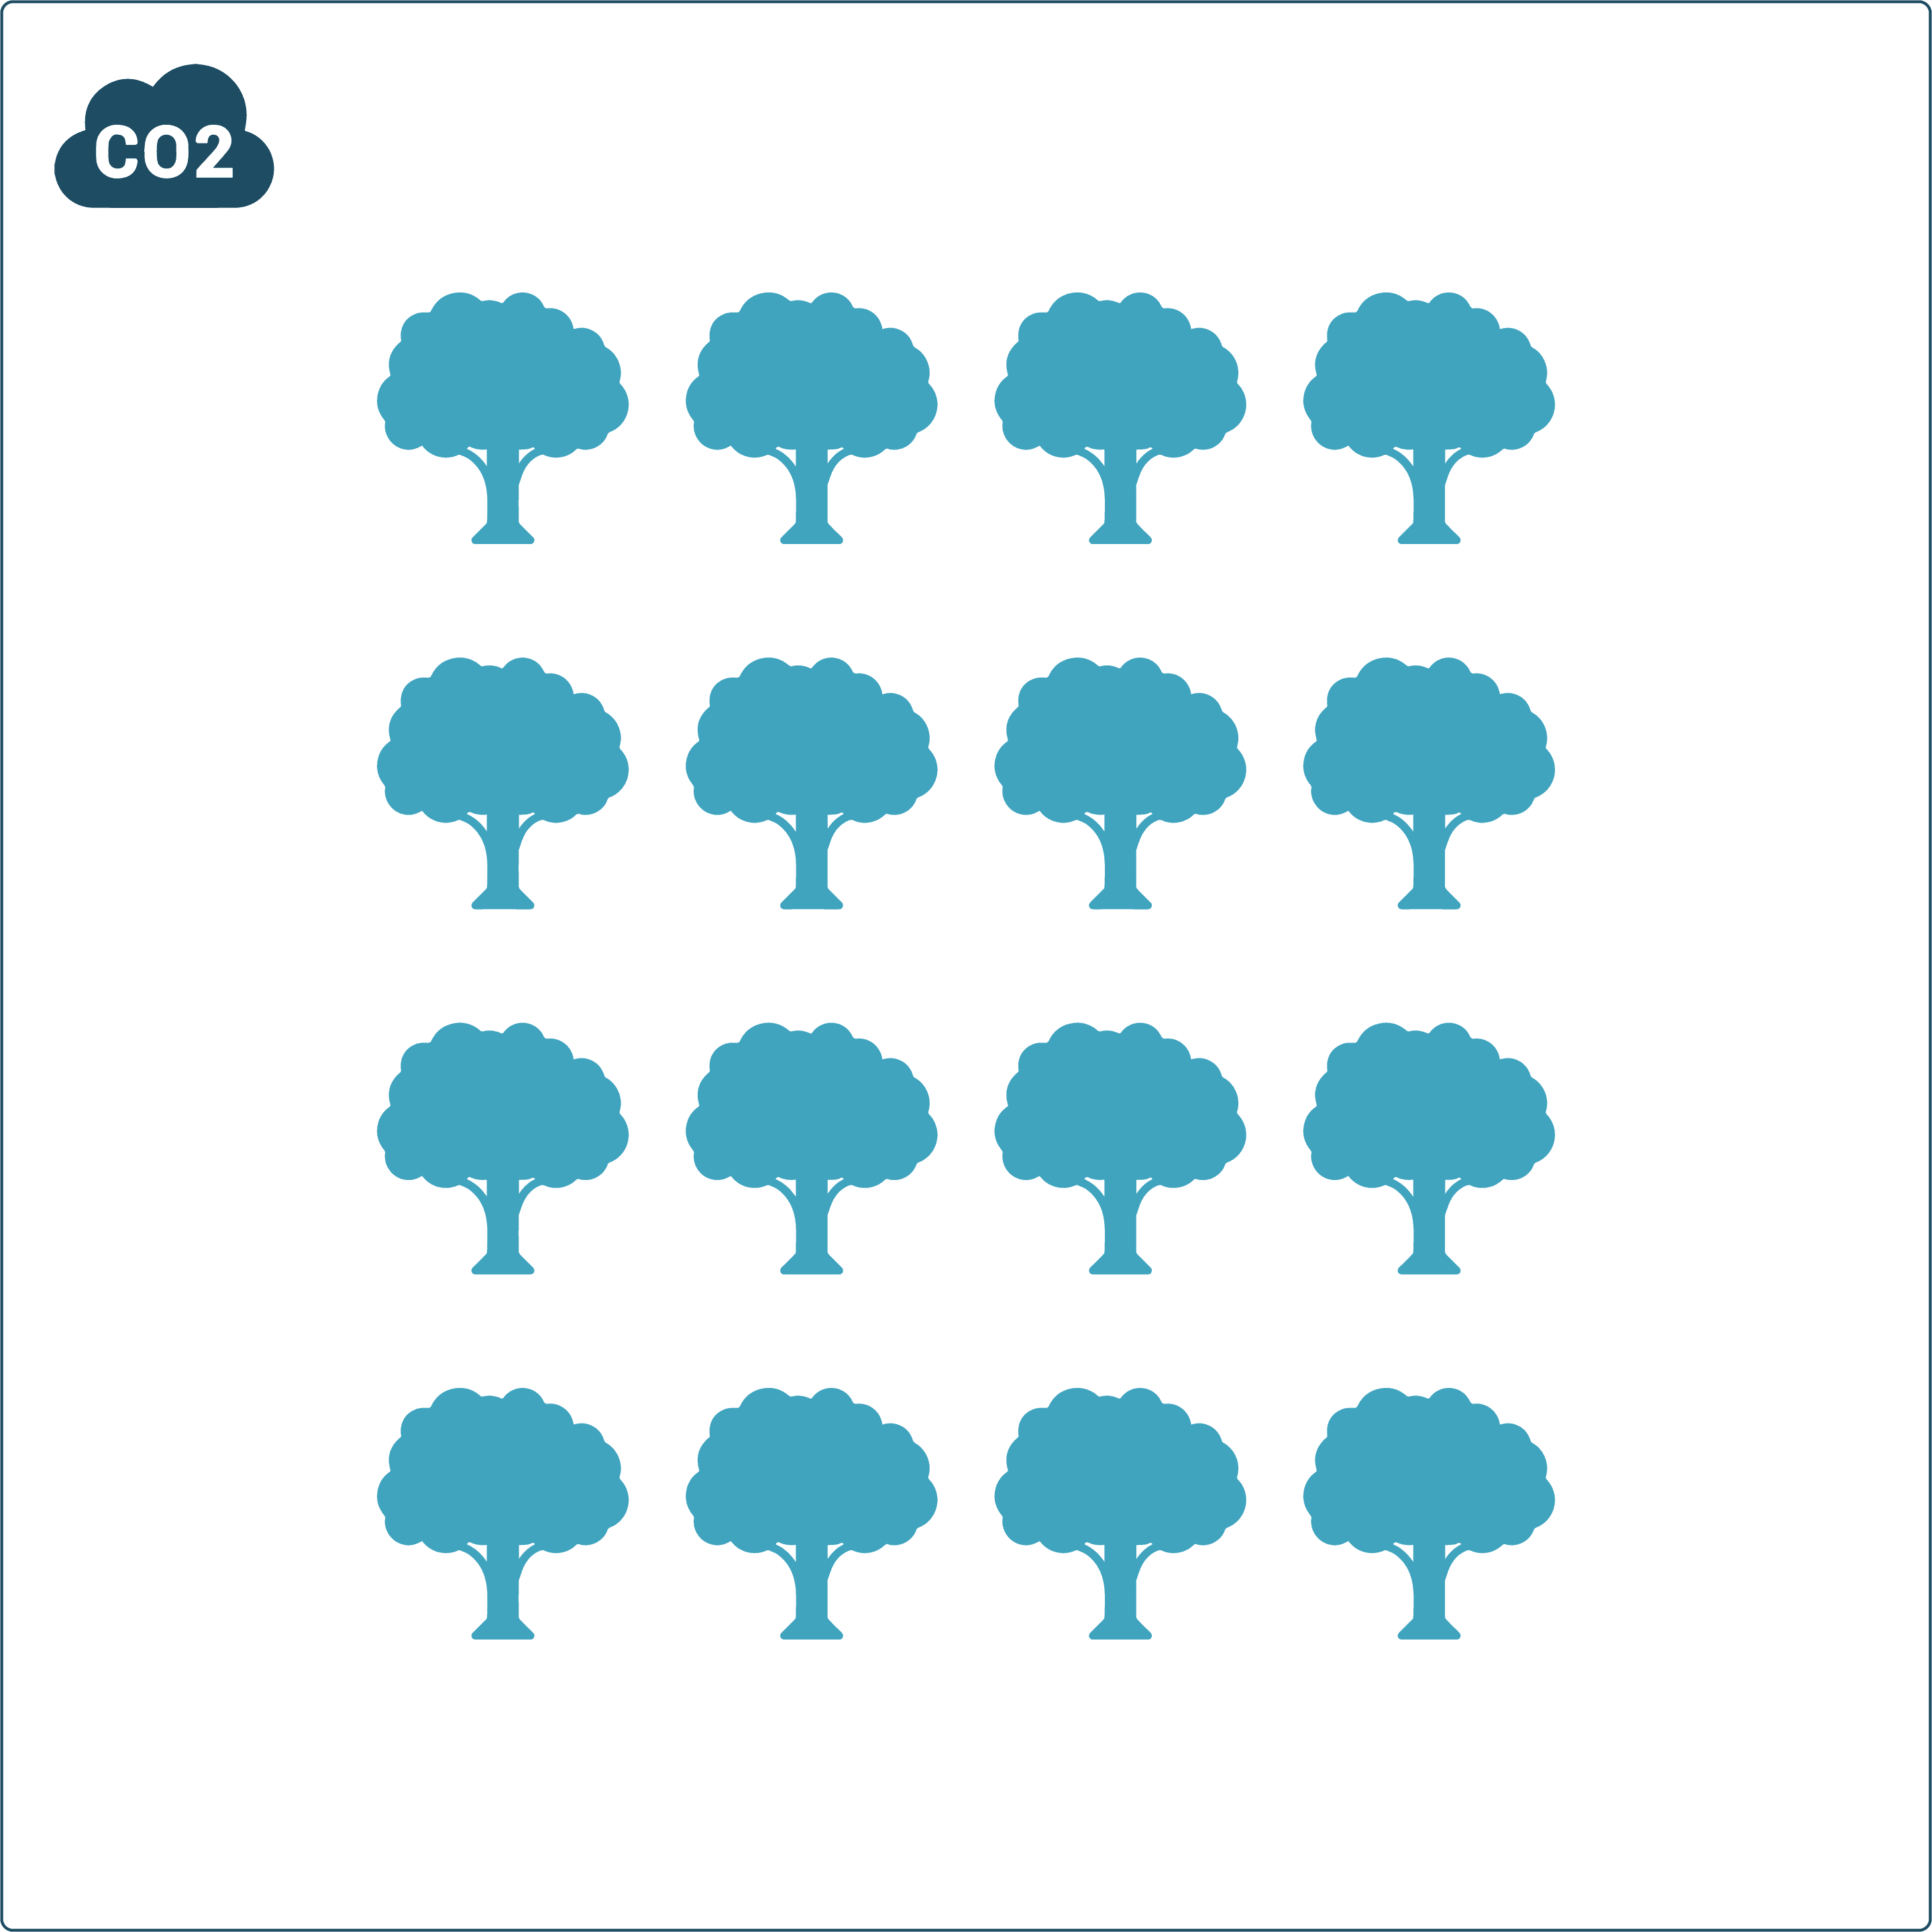 Your home’s fossil-sourced plan is emitting CO2 equivalent to  1,800 Young Trees  planted to absorb CO2.